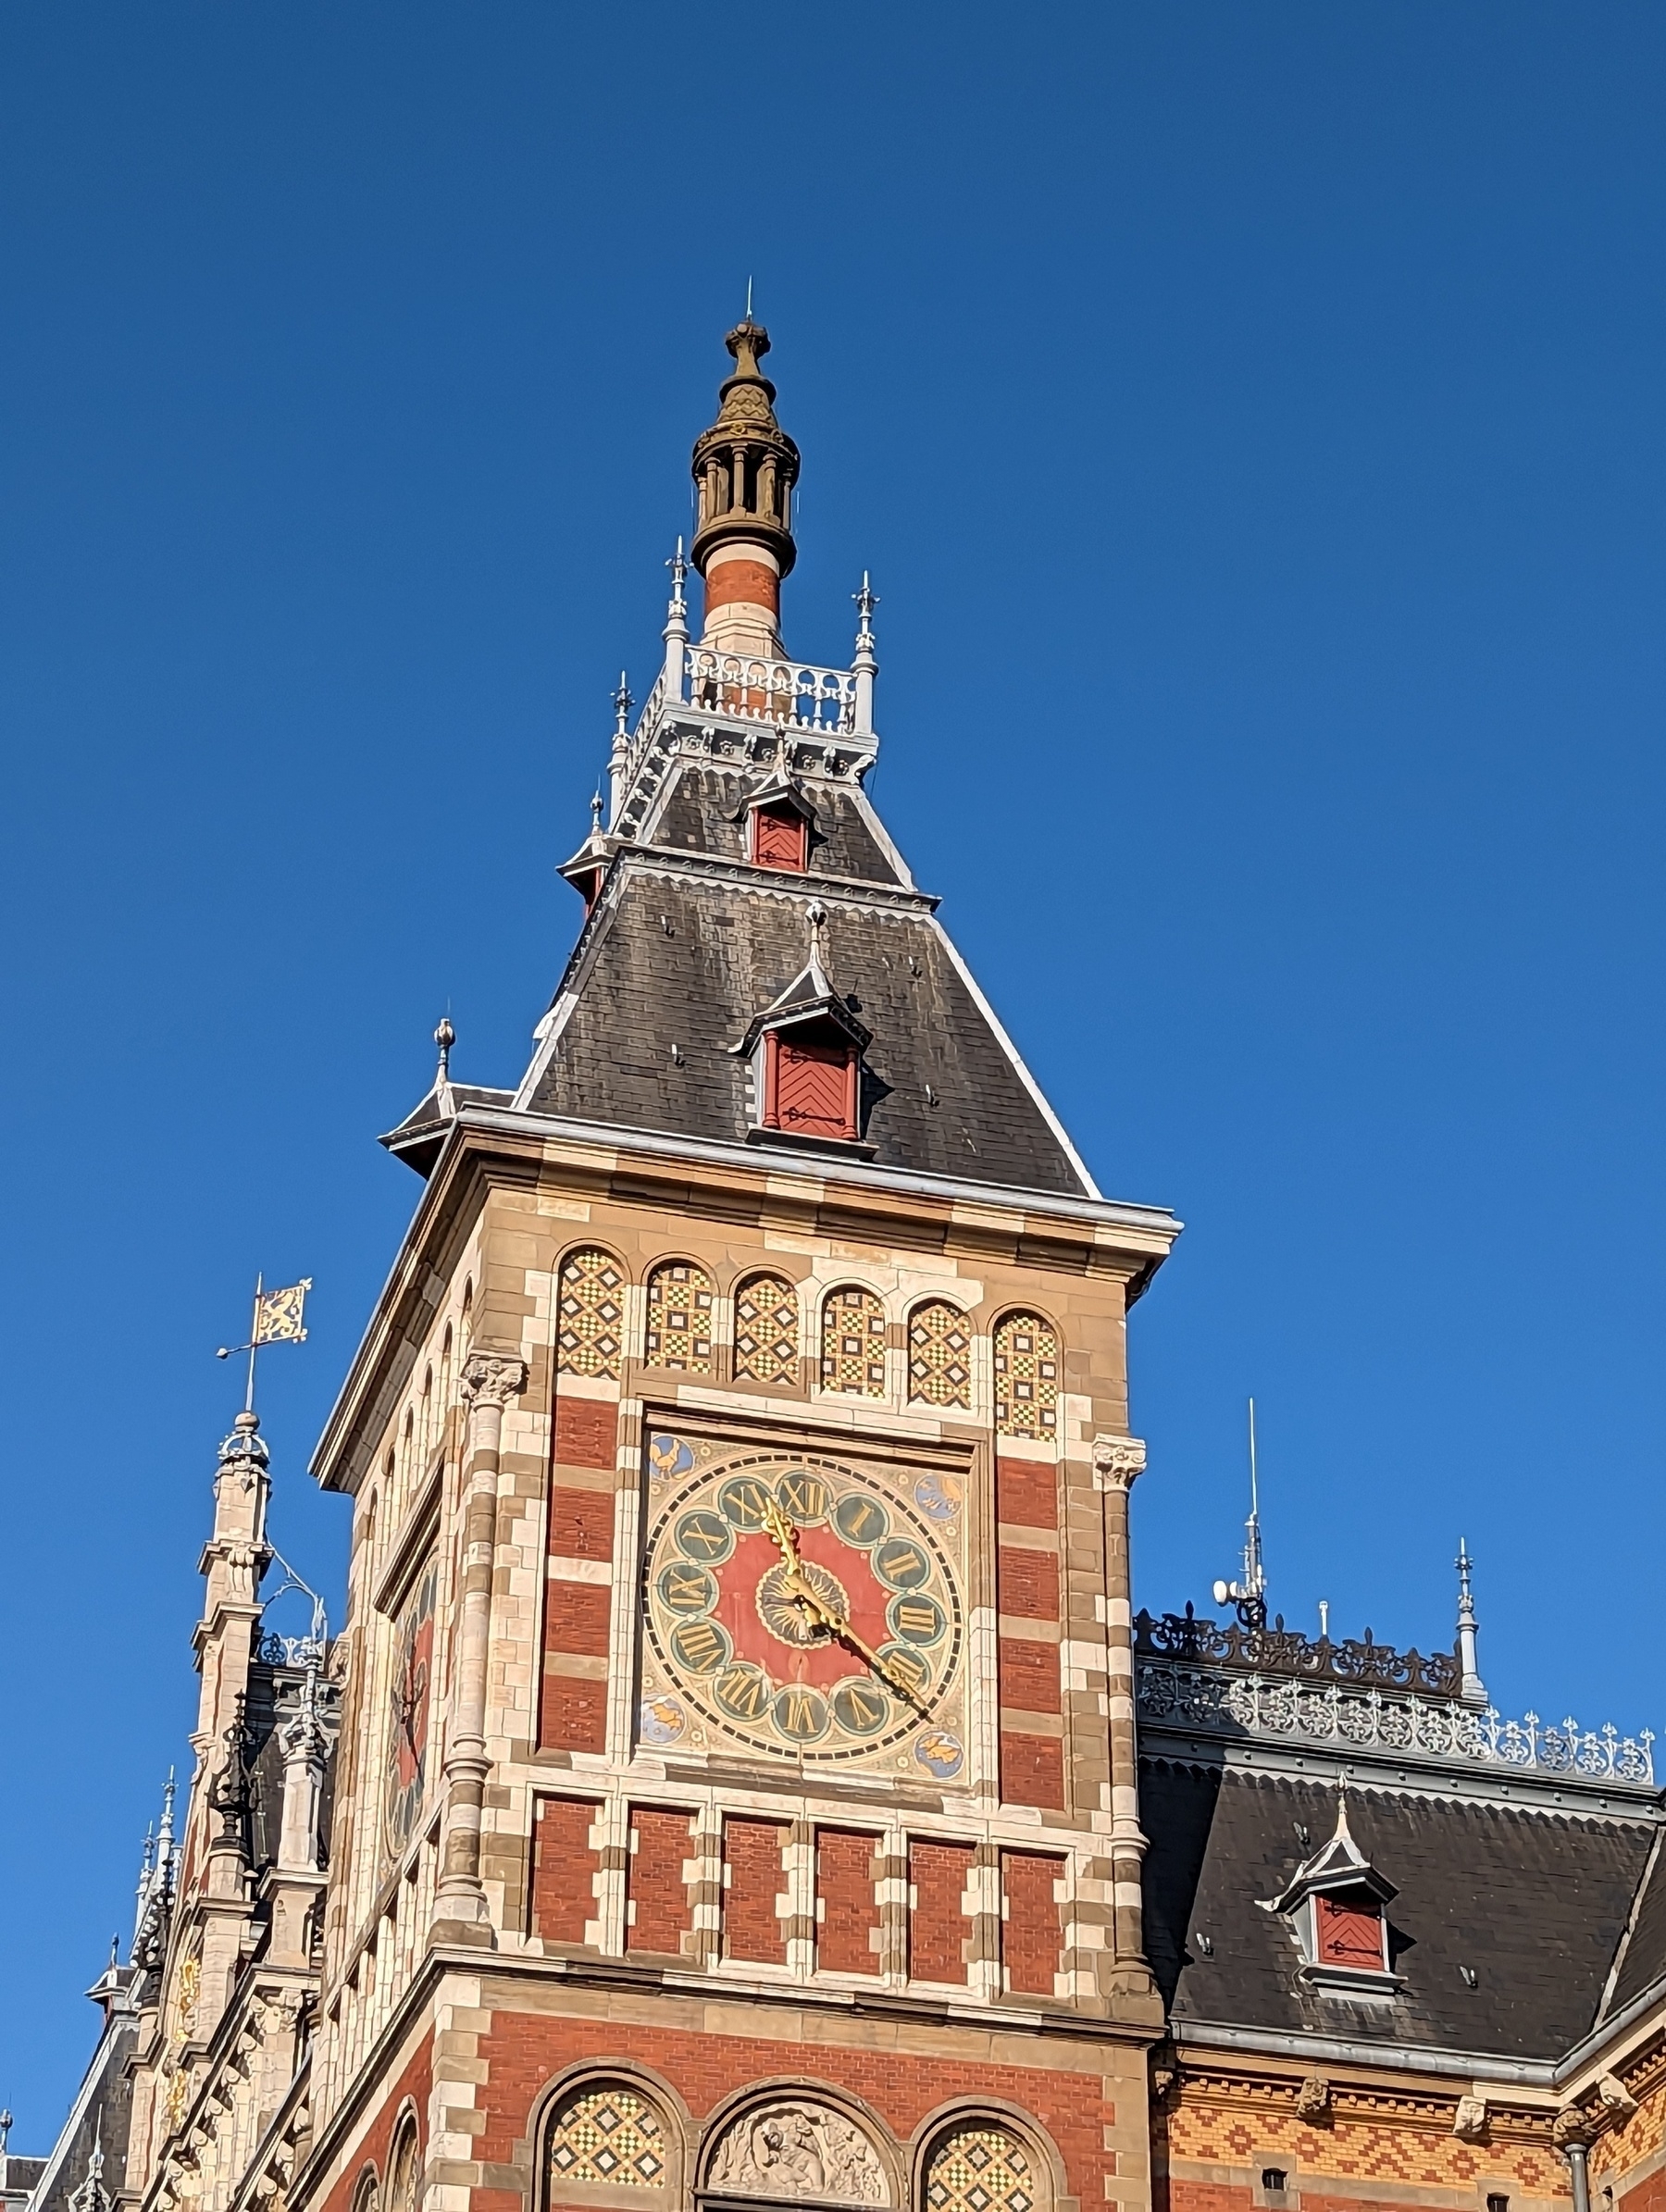 The clock tower at Amsterdam Centraal Station.